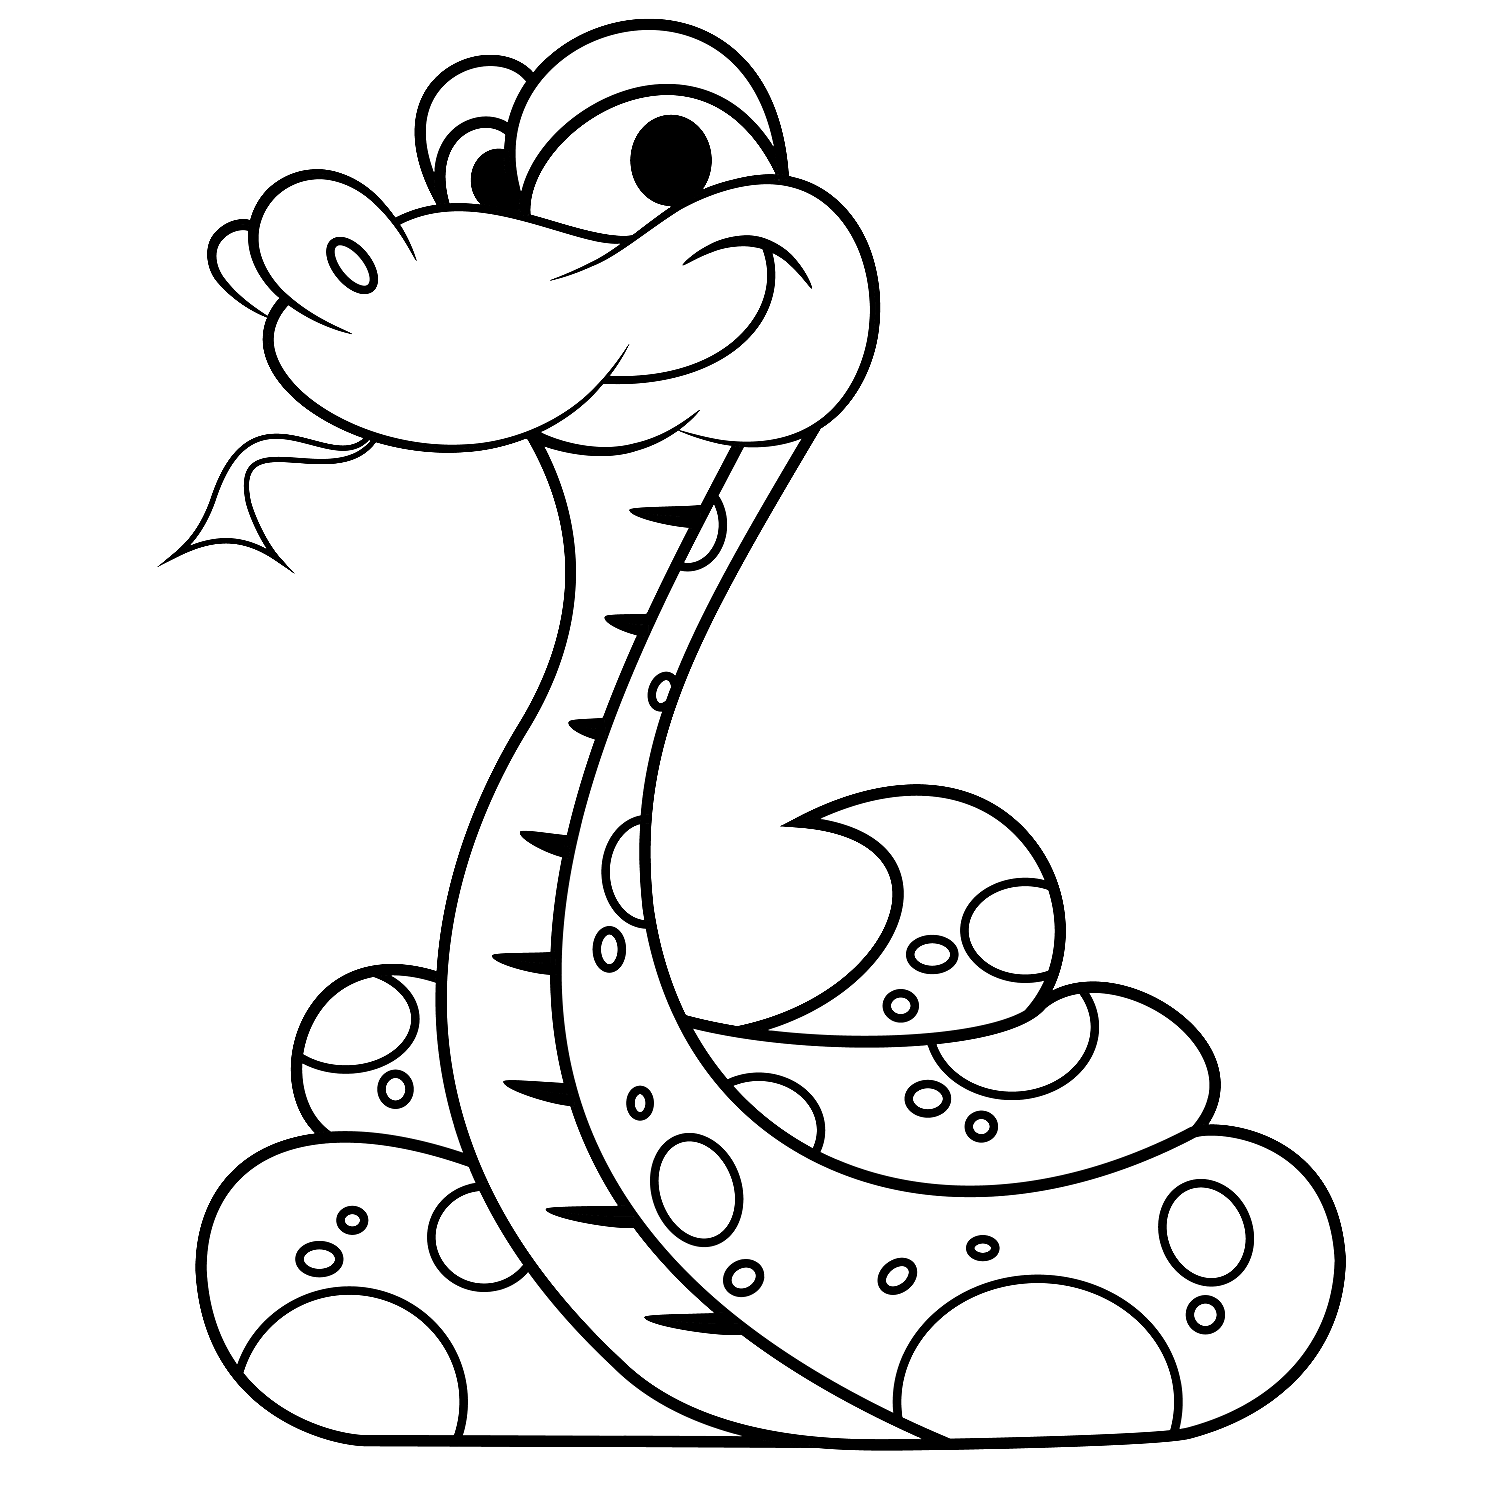 snakes colouring pages coloring pages snakes coloring pages free and printable colouring snakes pages 